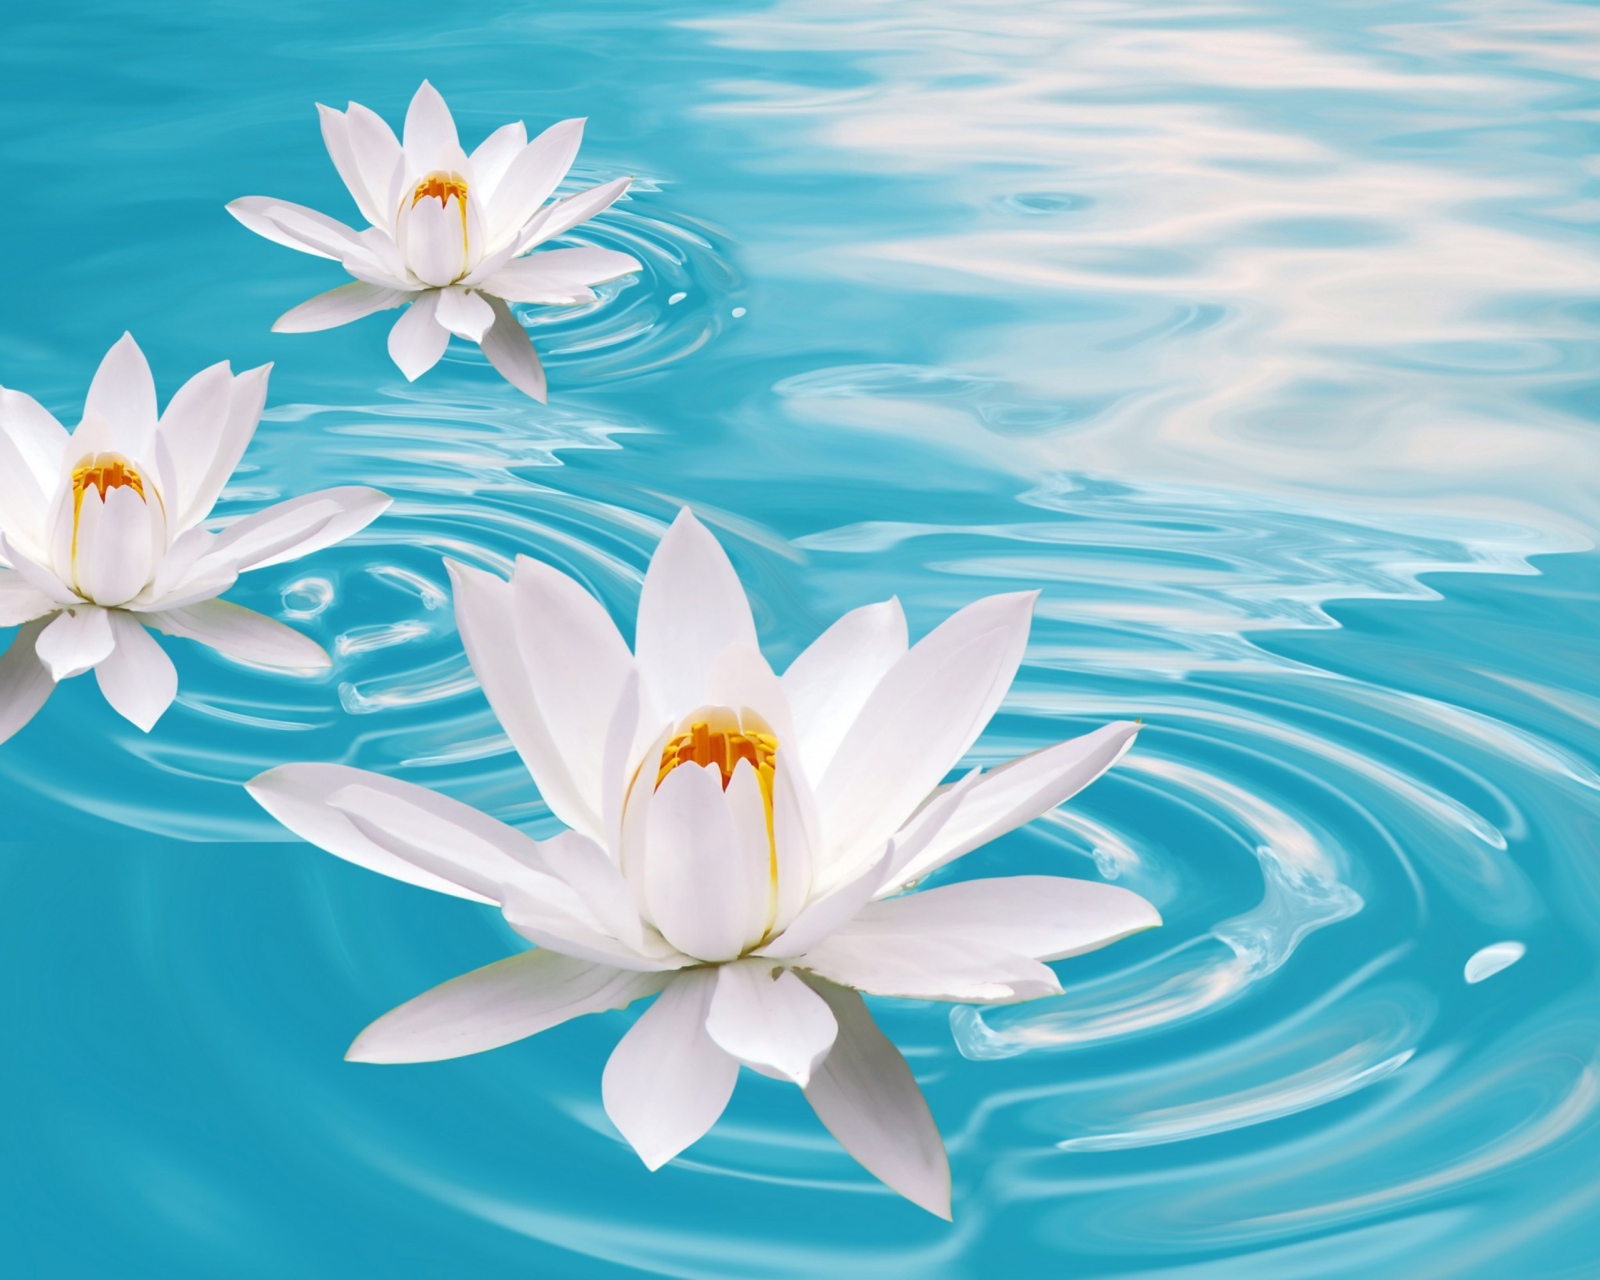 White Lilies And Blue Water wallpaper 1600x1280